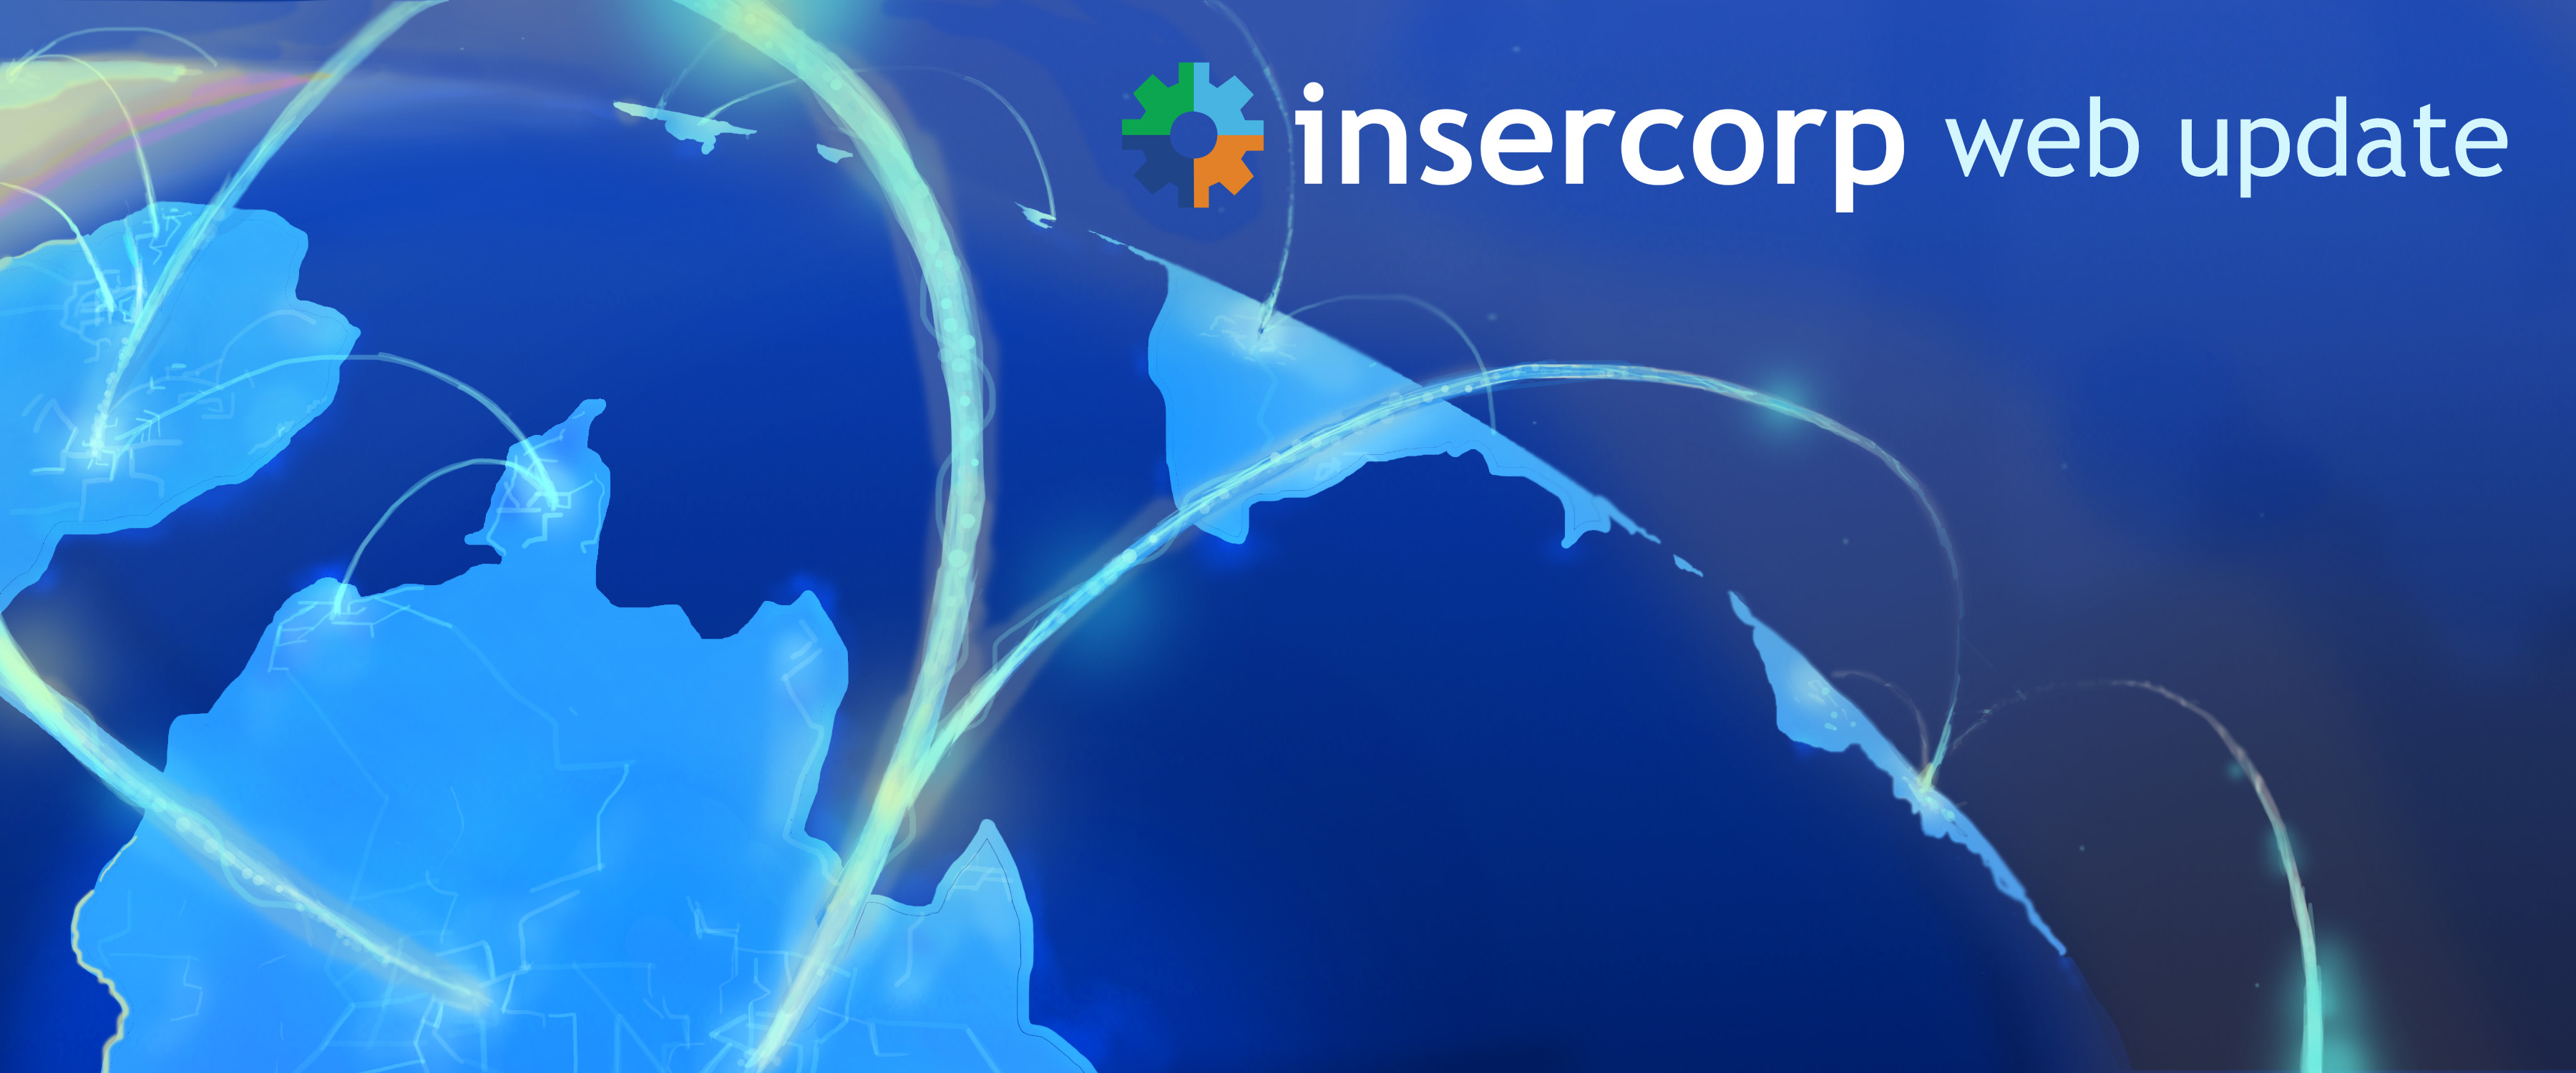 Beamon & Johnson, Inc. Moves Forward with Insercorp!